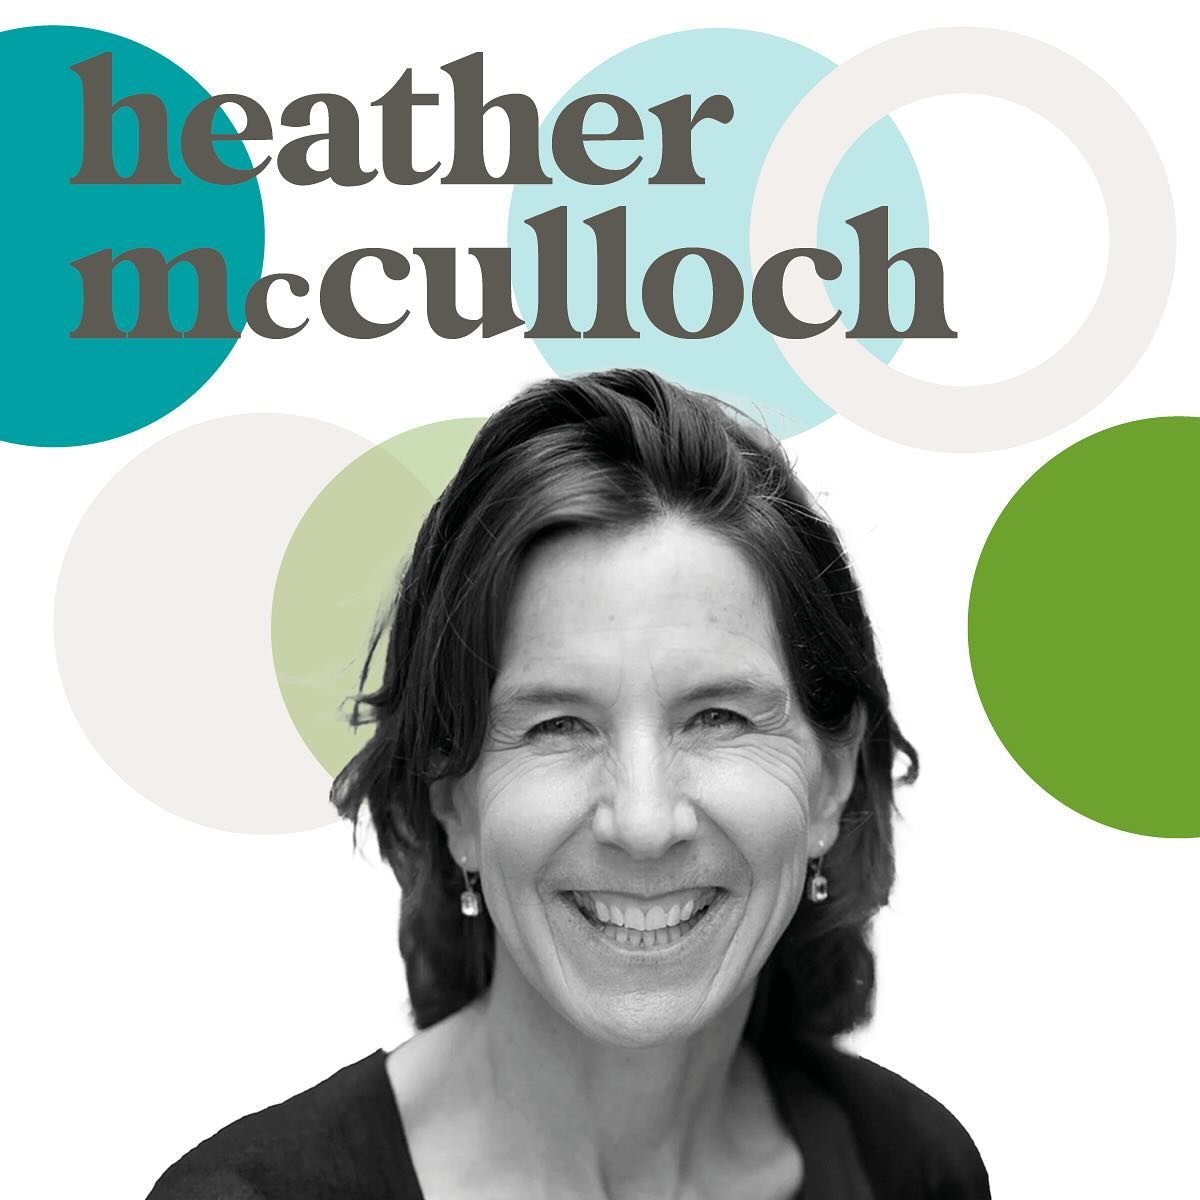 💰💡🎙️ Meet this week&rsquo;s spotlight, Heather McCulloch&mdash;one of our Summit speakers!

Title of her talk: &ldquo;What if the economy worked for women?&rdquo;

Heather&rsquo;s talk will explain why the economic prosperity of women needs to be 